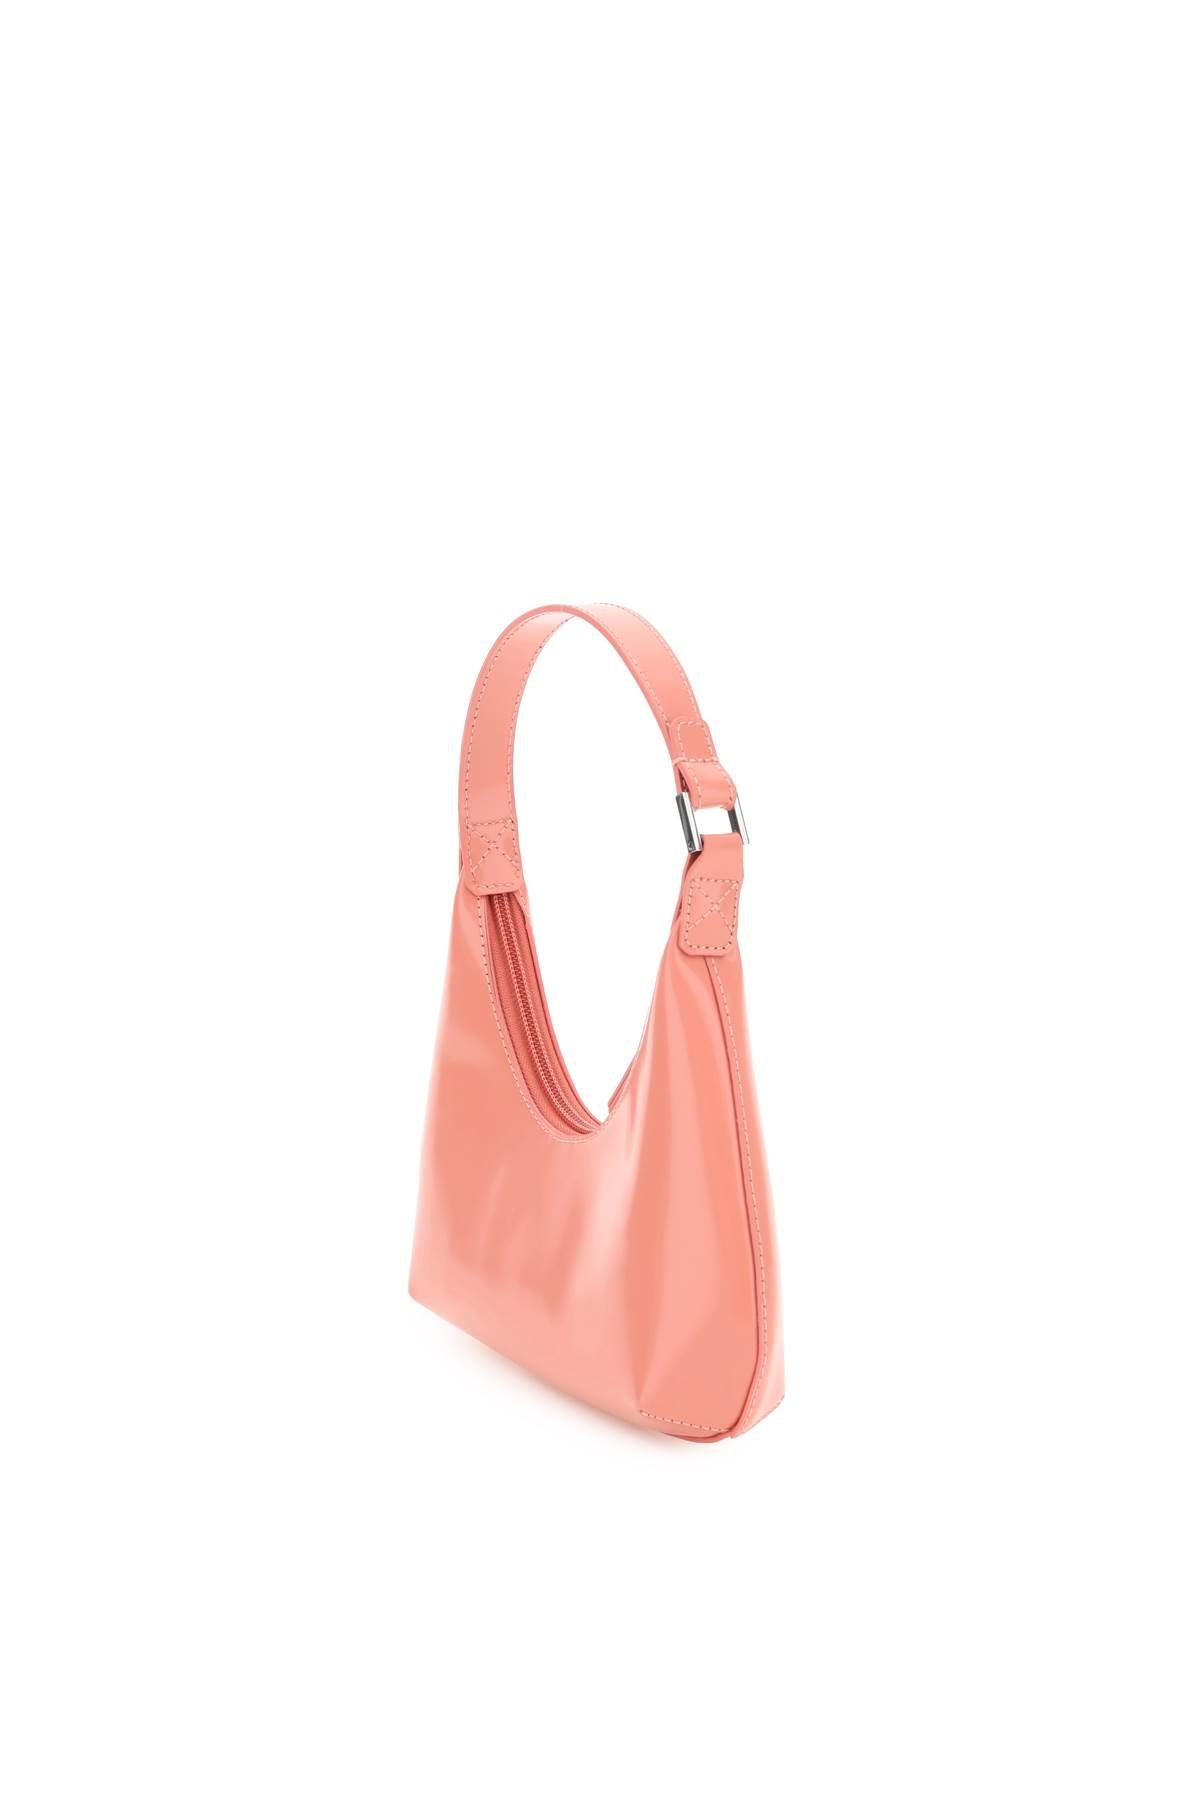 BY FAR Leather Amber Bag in Pink - Save 29% | Lyst